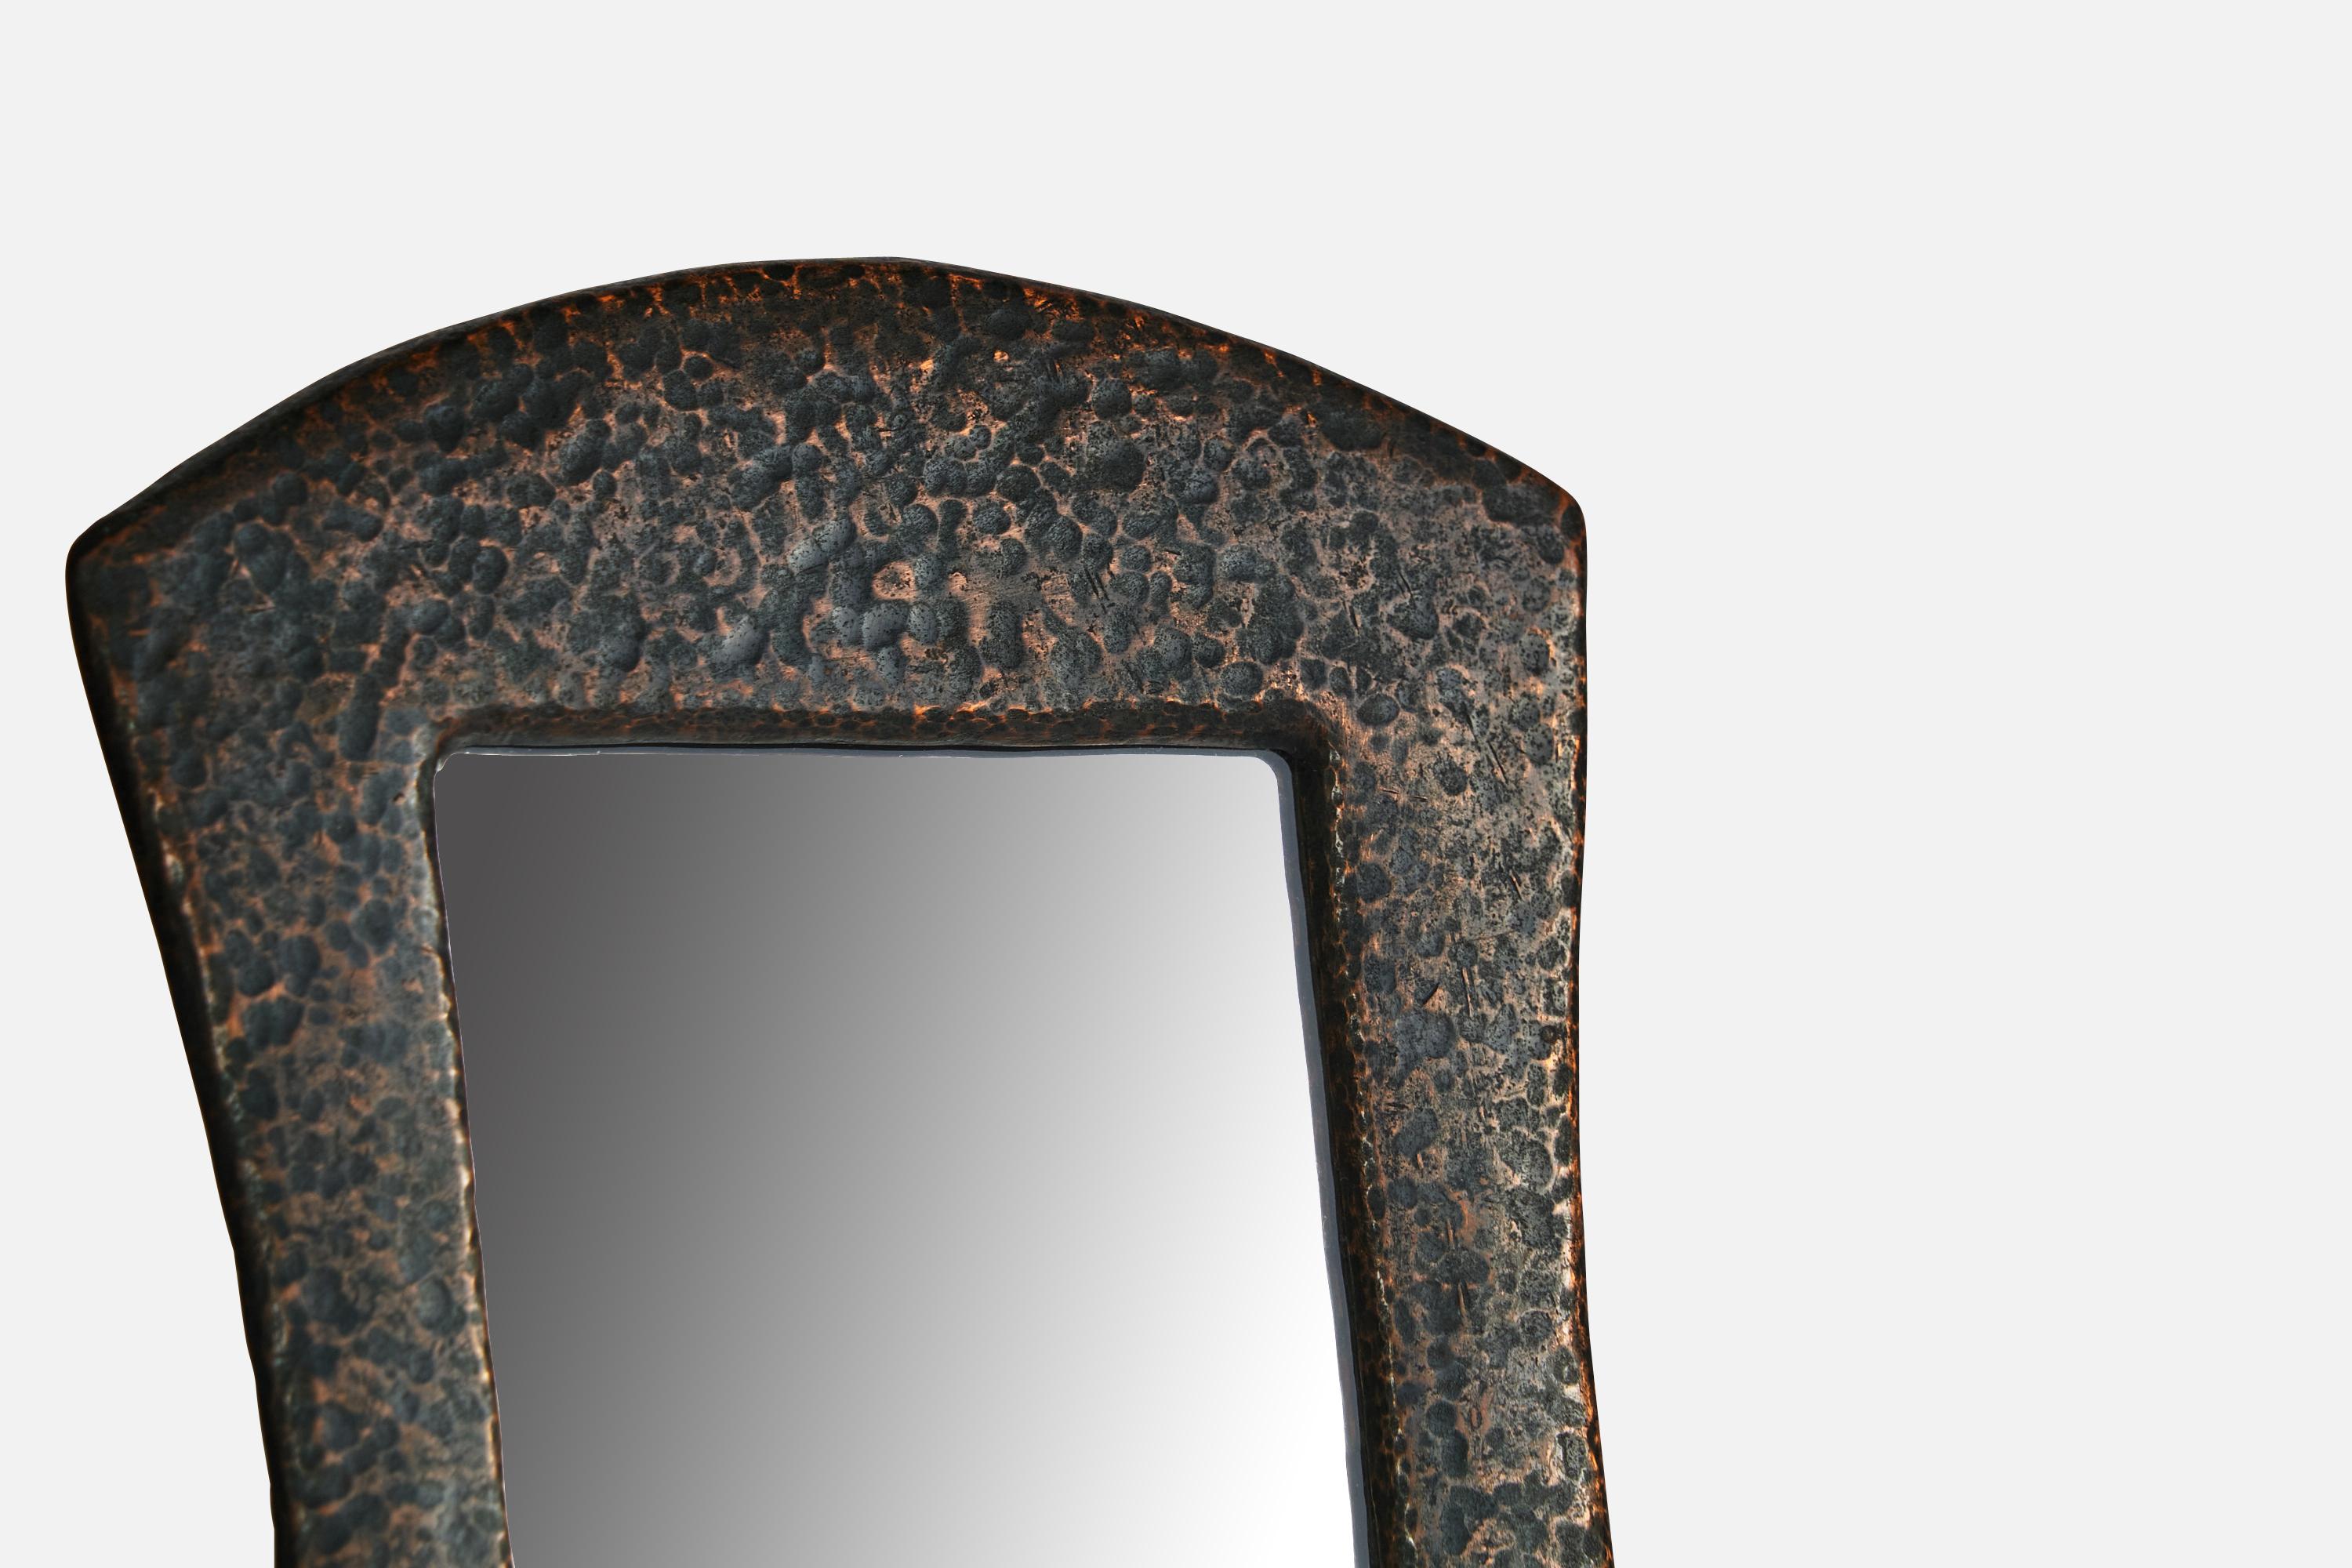 A hammered and darkened copper mirror designed and produced in Sweden, c. 1920s.